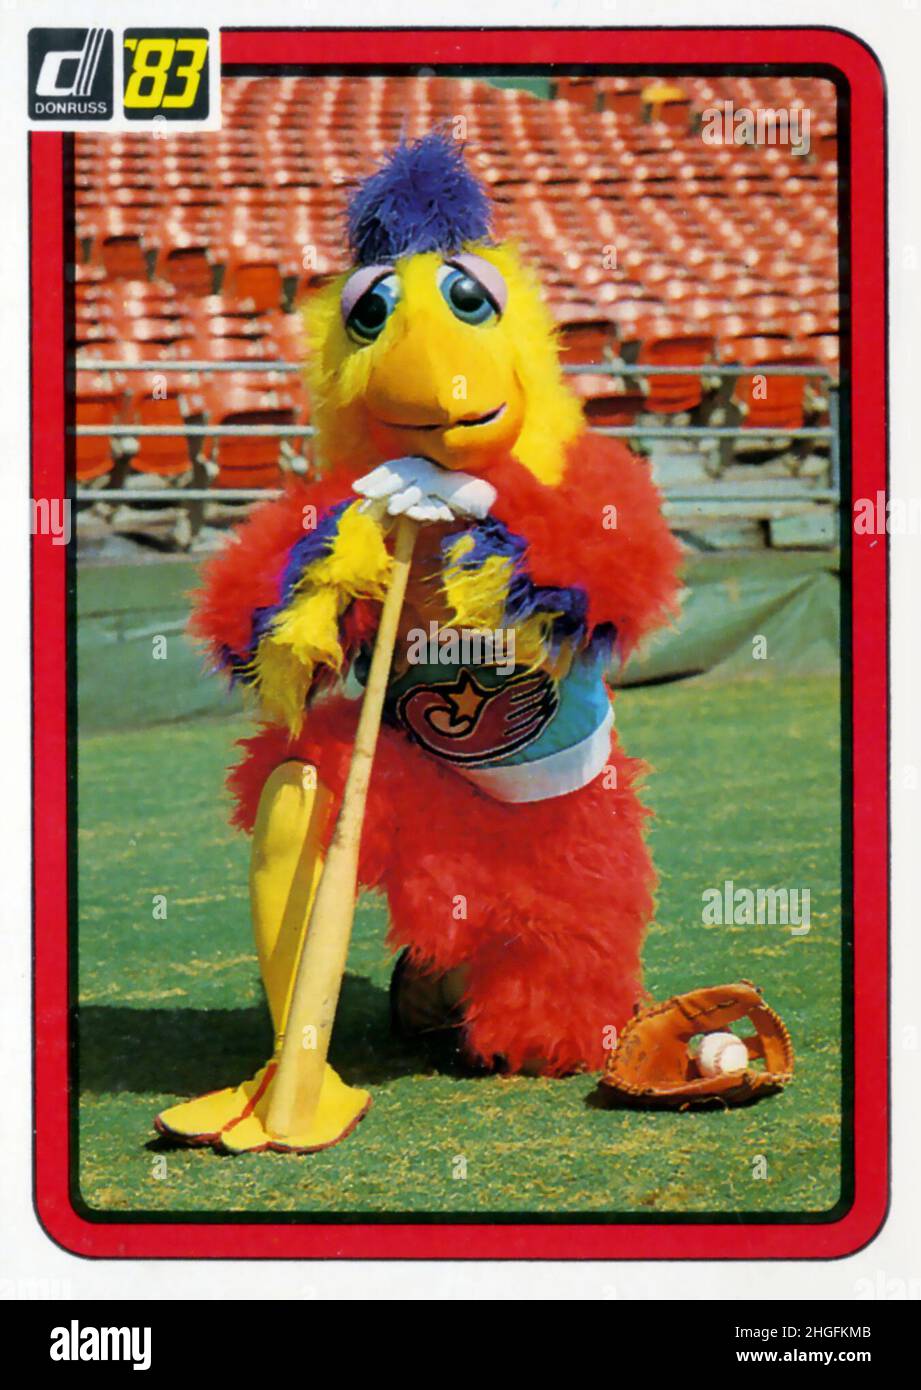 1983 Donruss baseball card depicting The San Diego Chicken, the mascot for the San Diego Padres played by Ted Giannoulas. Stock Photo